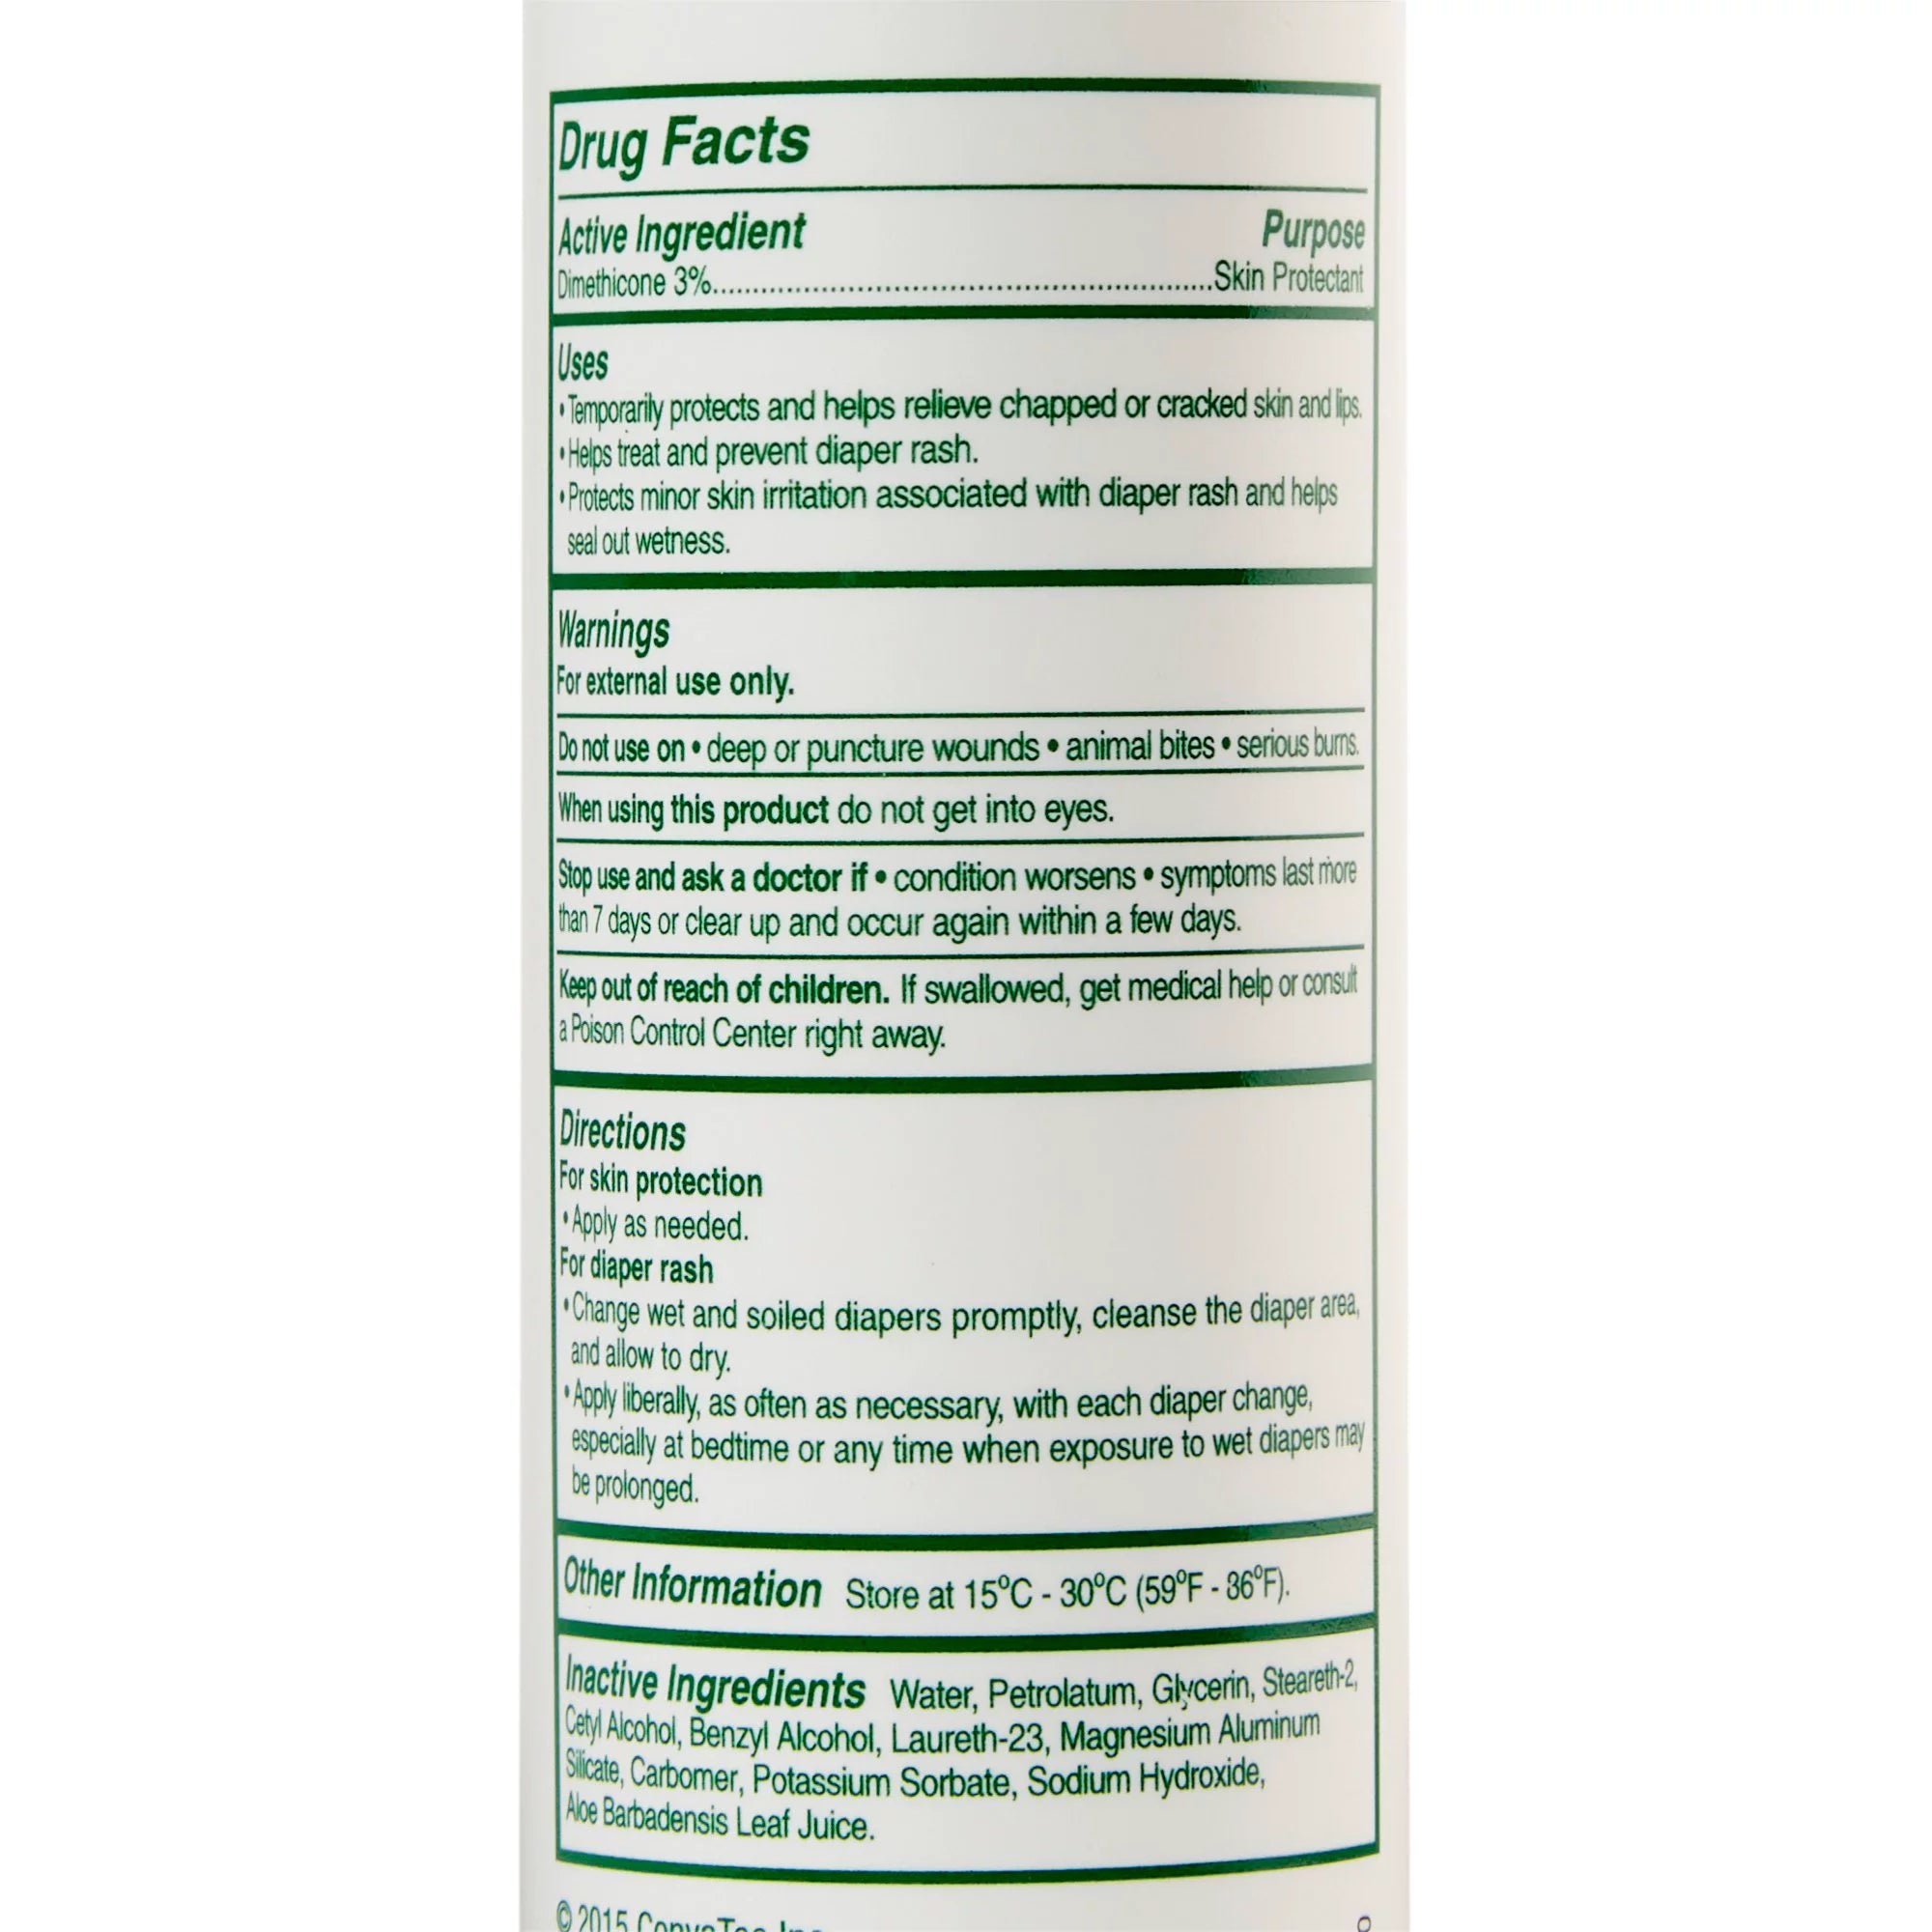 Aloe Vesta back of bottle containing drug facts, active ingredients, uses, warnings and directions for use